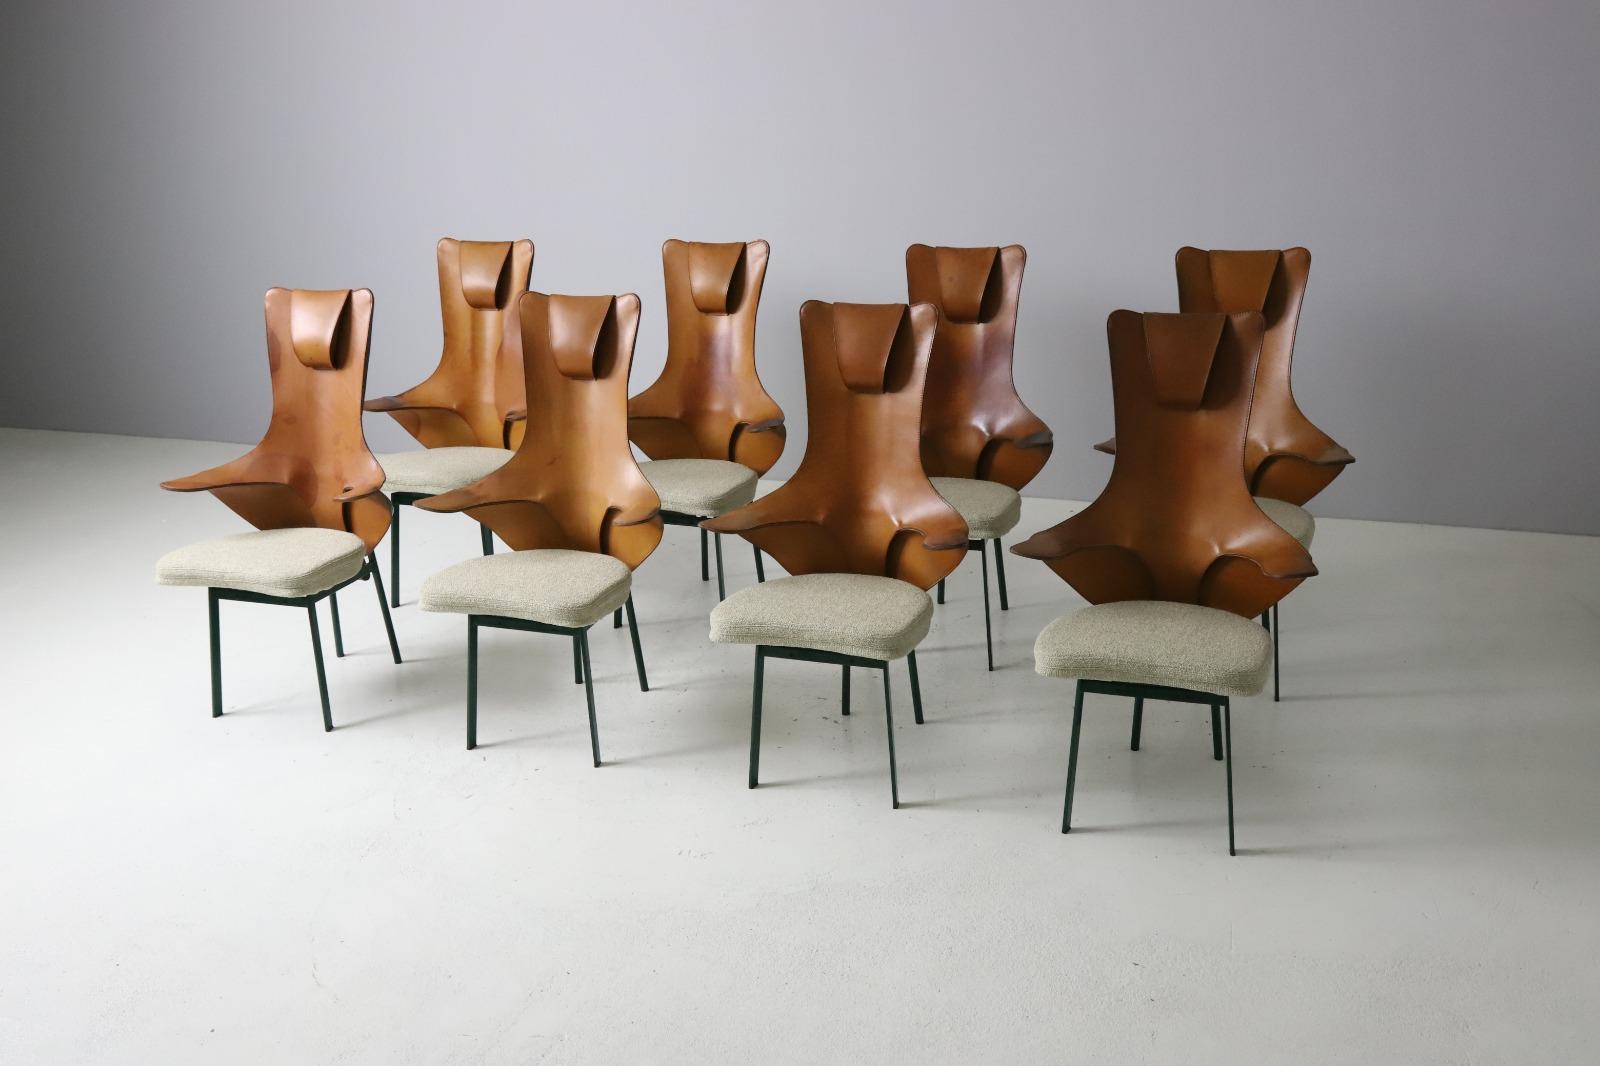 Rare and monumental set of 8 'Regina' dining chairs designed by Paolo Deganello for Zanotta, Italy 1991. 
The chairs feature a lacquered metal structure covered in saddle leather. Over the years the leather obtained a strong and warm patina. The